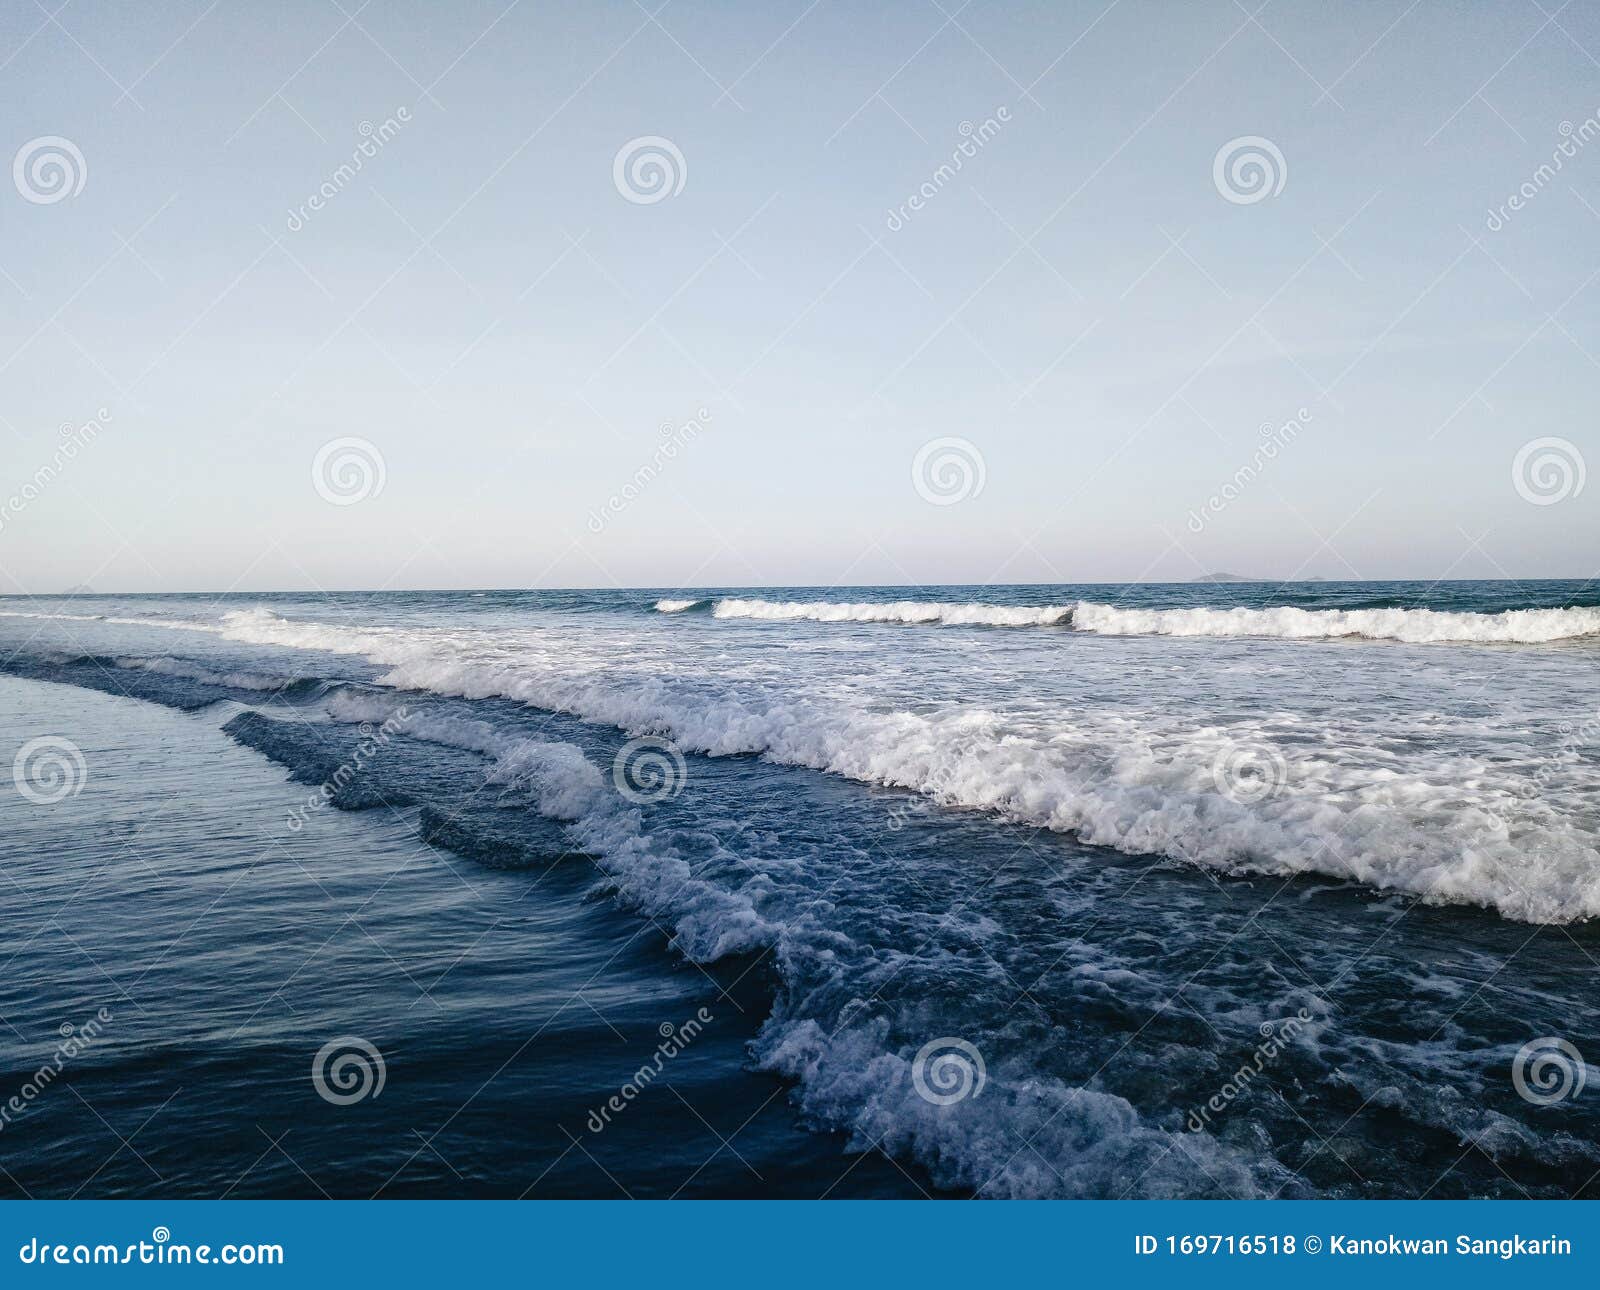 Ocean waves of beauty 2020 stock photo. Image of 2020 - 169716518